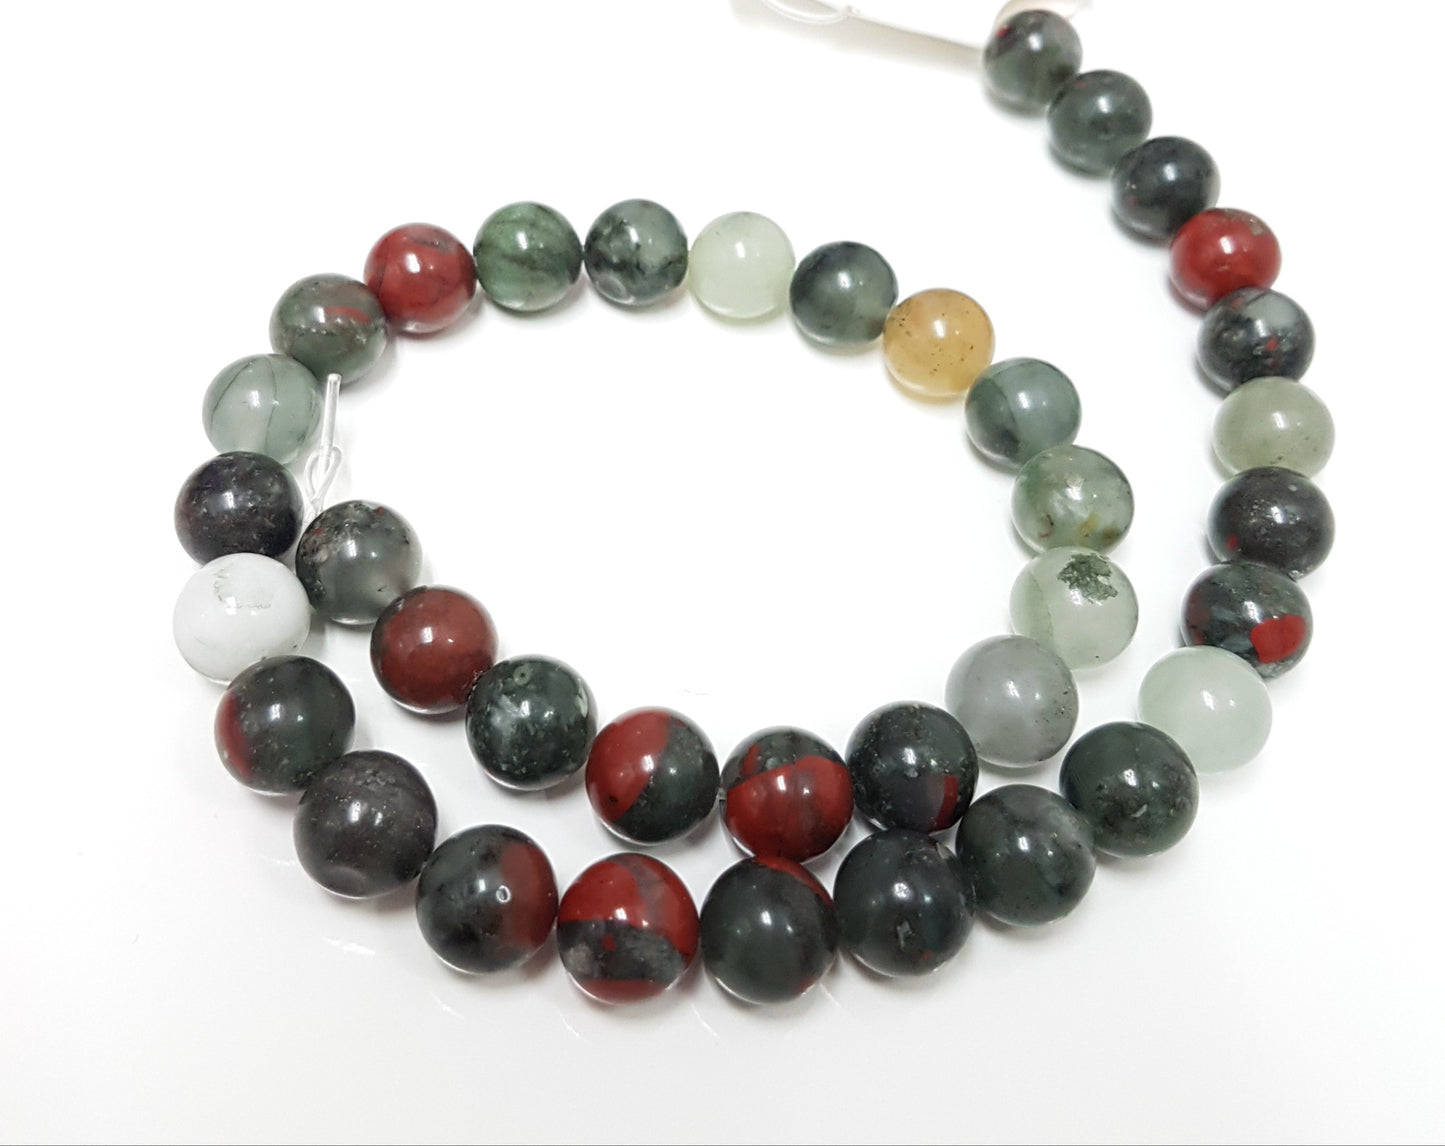 10mm Indian Agate Gemstone Beads